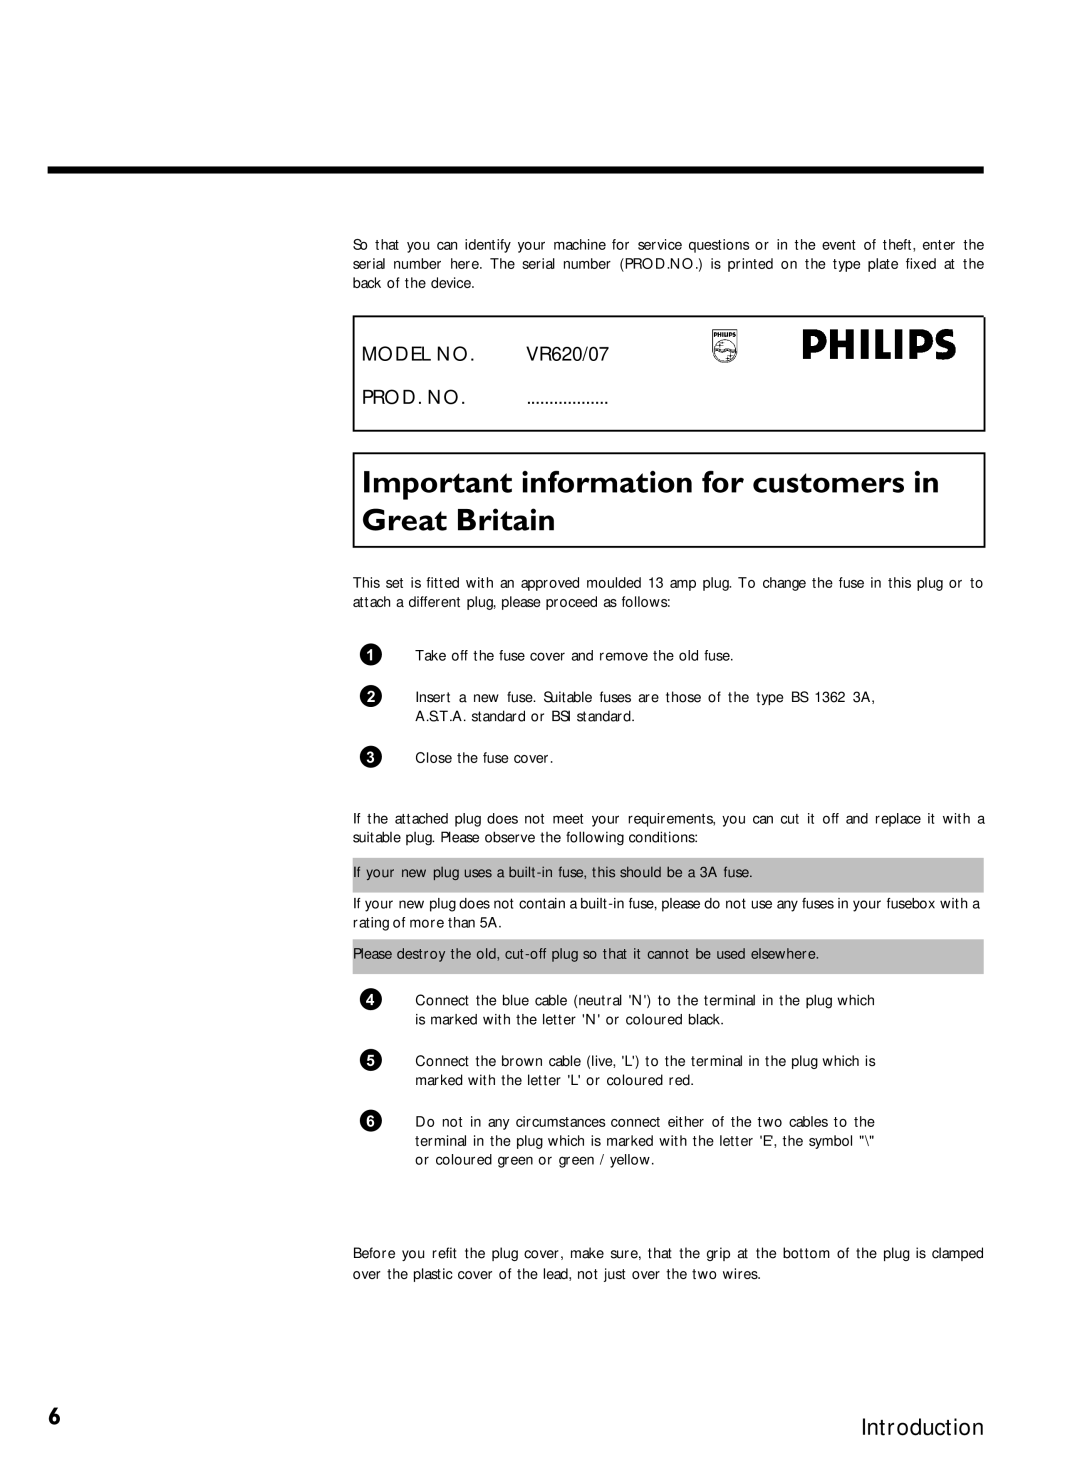 Philips VR620/07 specifications Important information for customers in Great Britain 